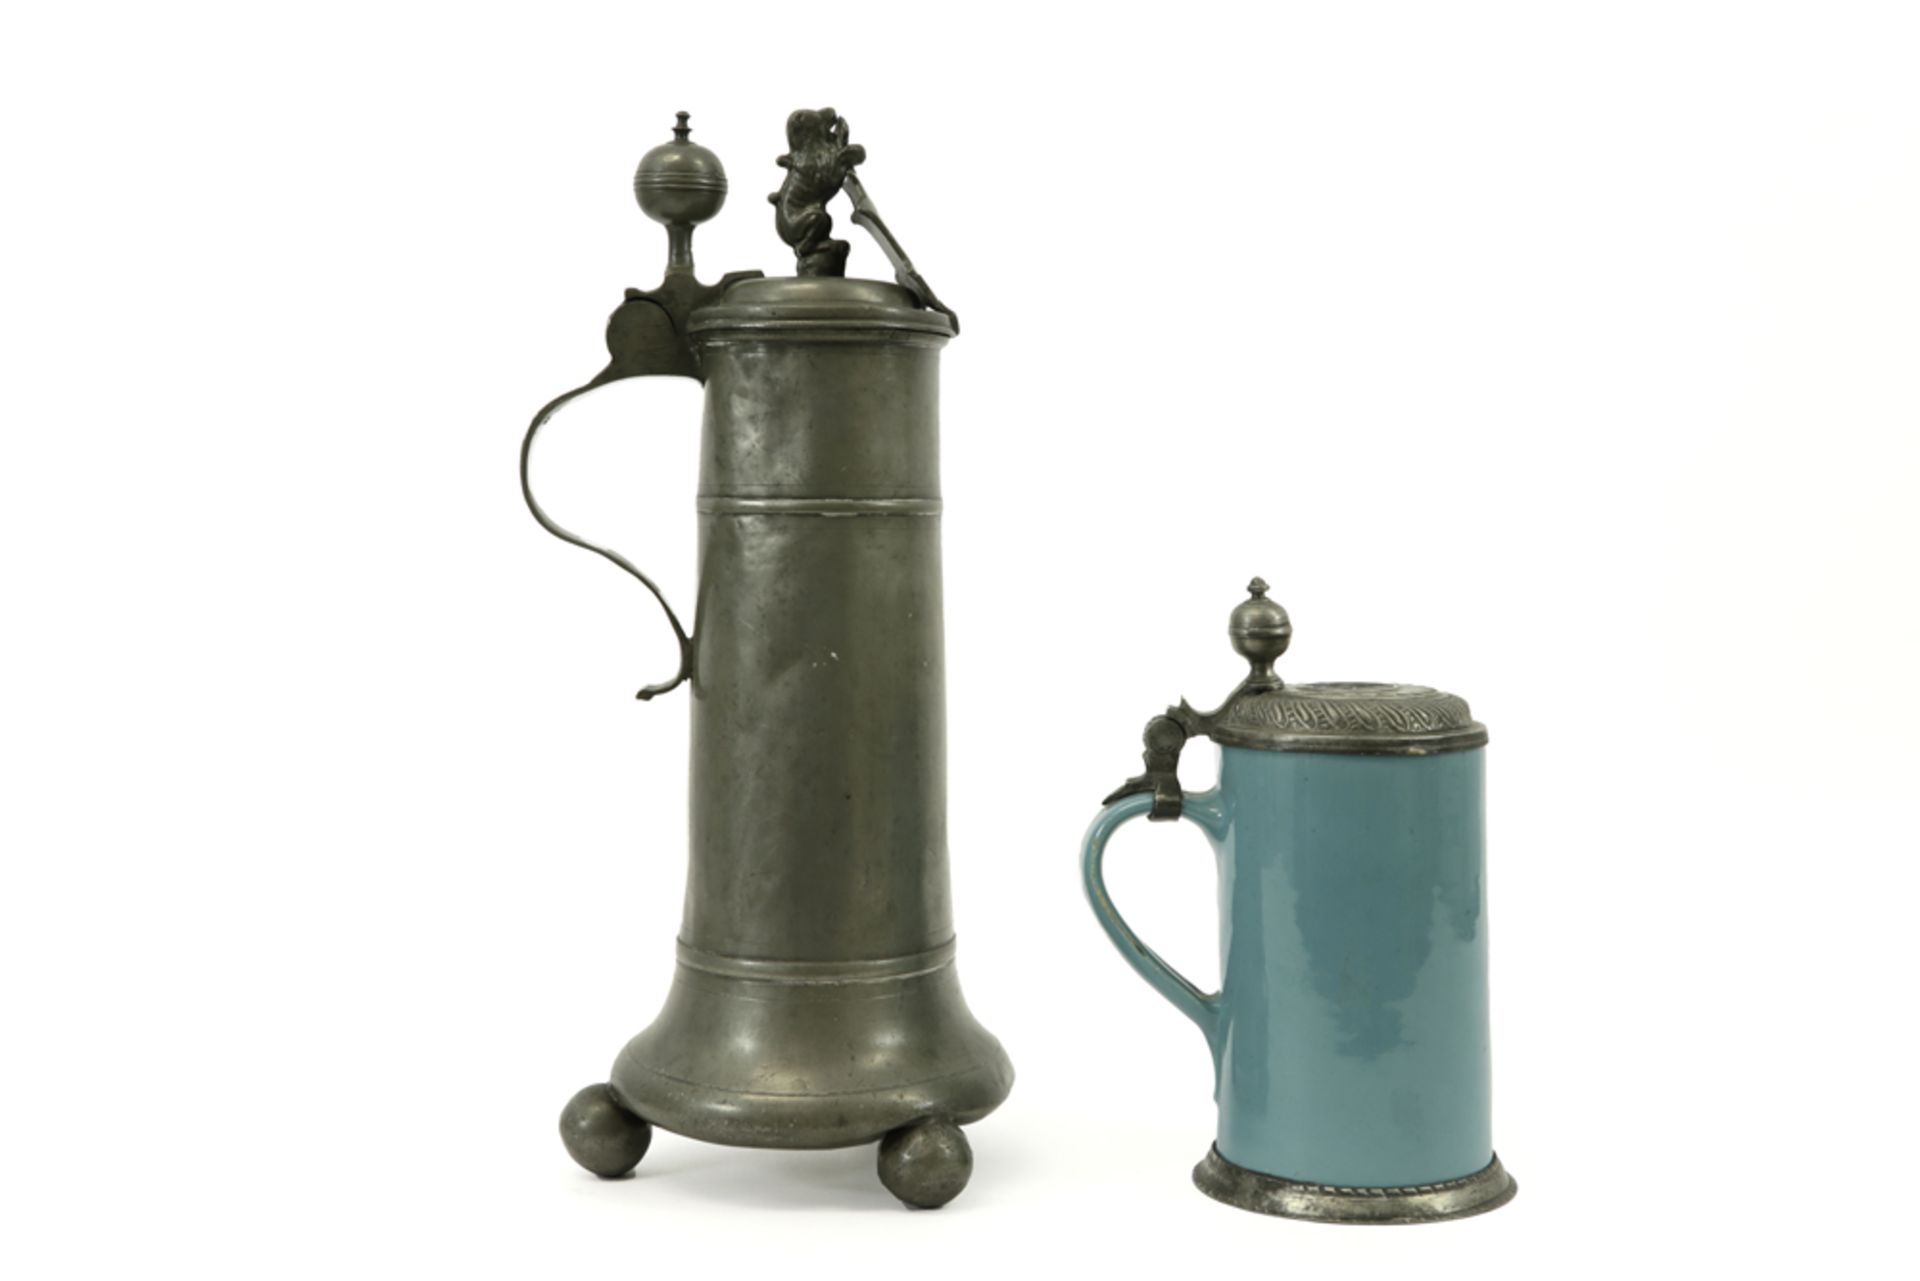 18th Cent. guild tankard in pewter and a beer jug in glazed ceramic and pewter || Lot (2) van een